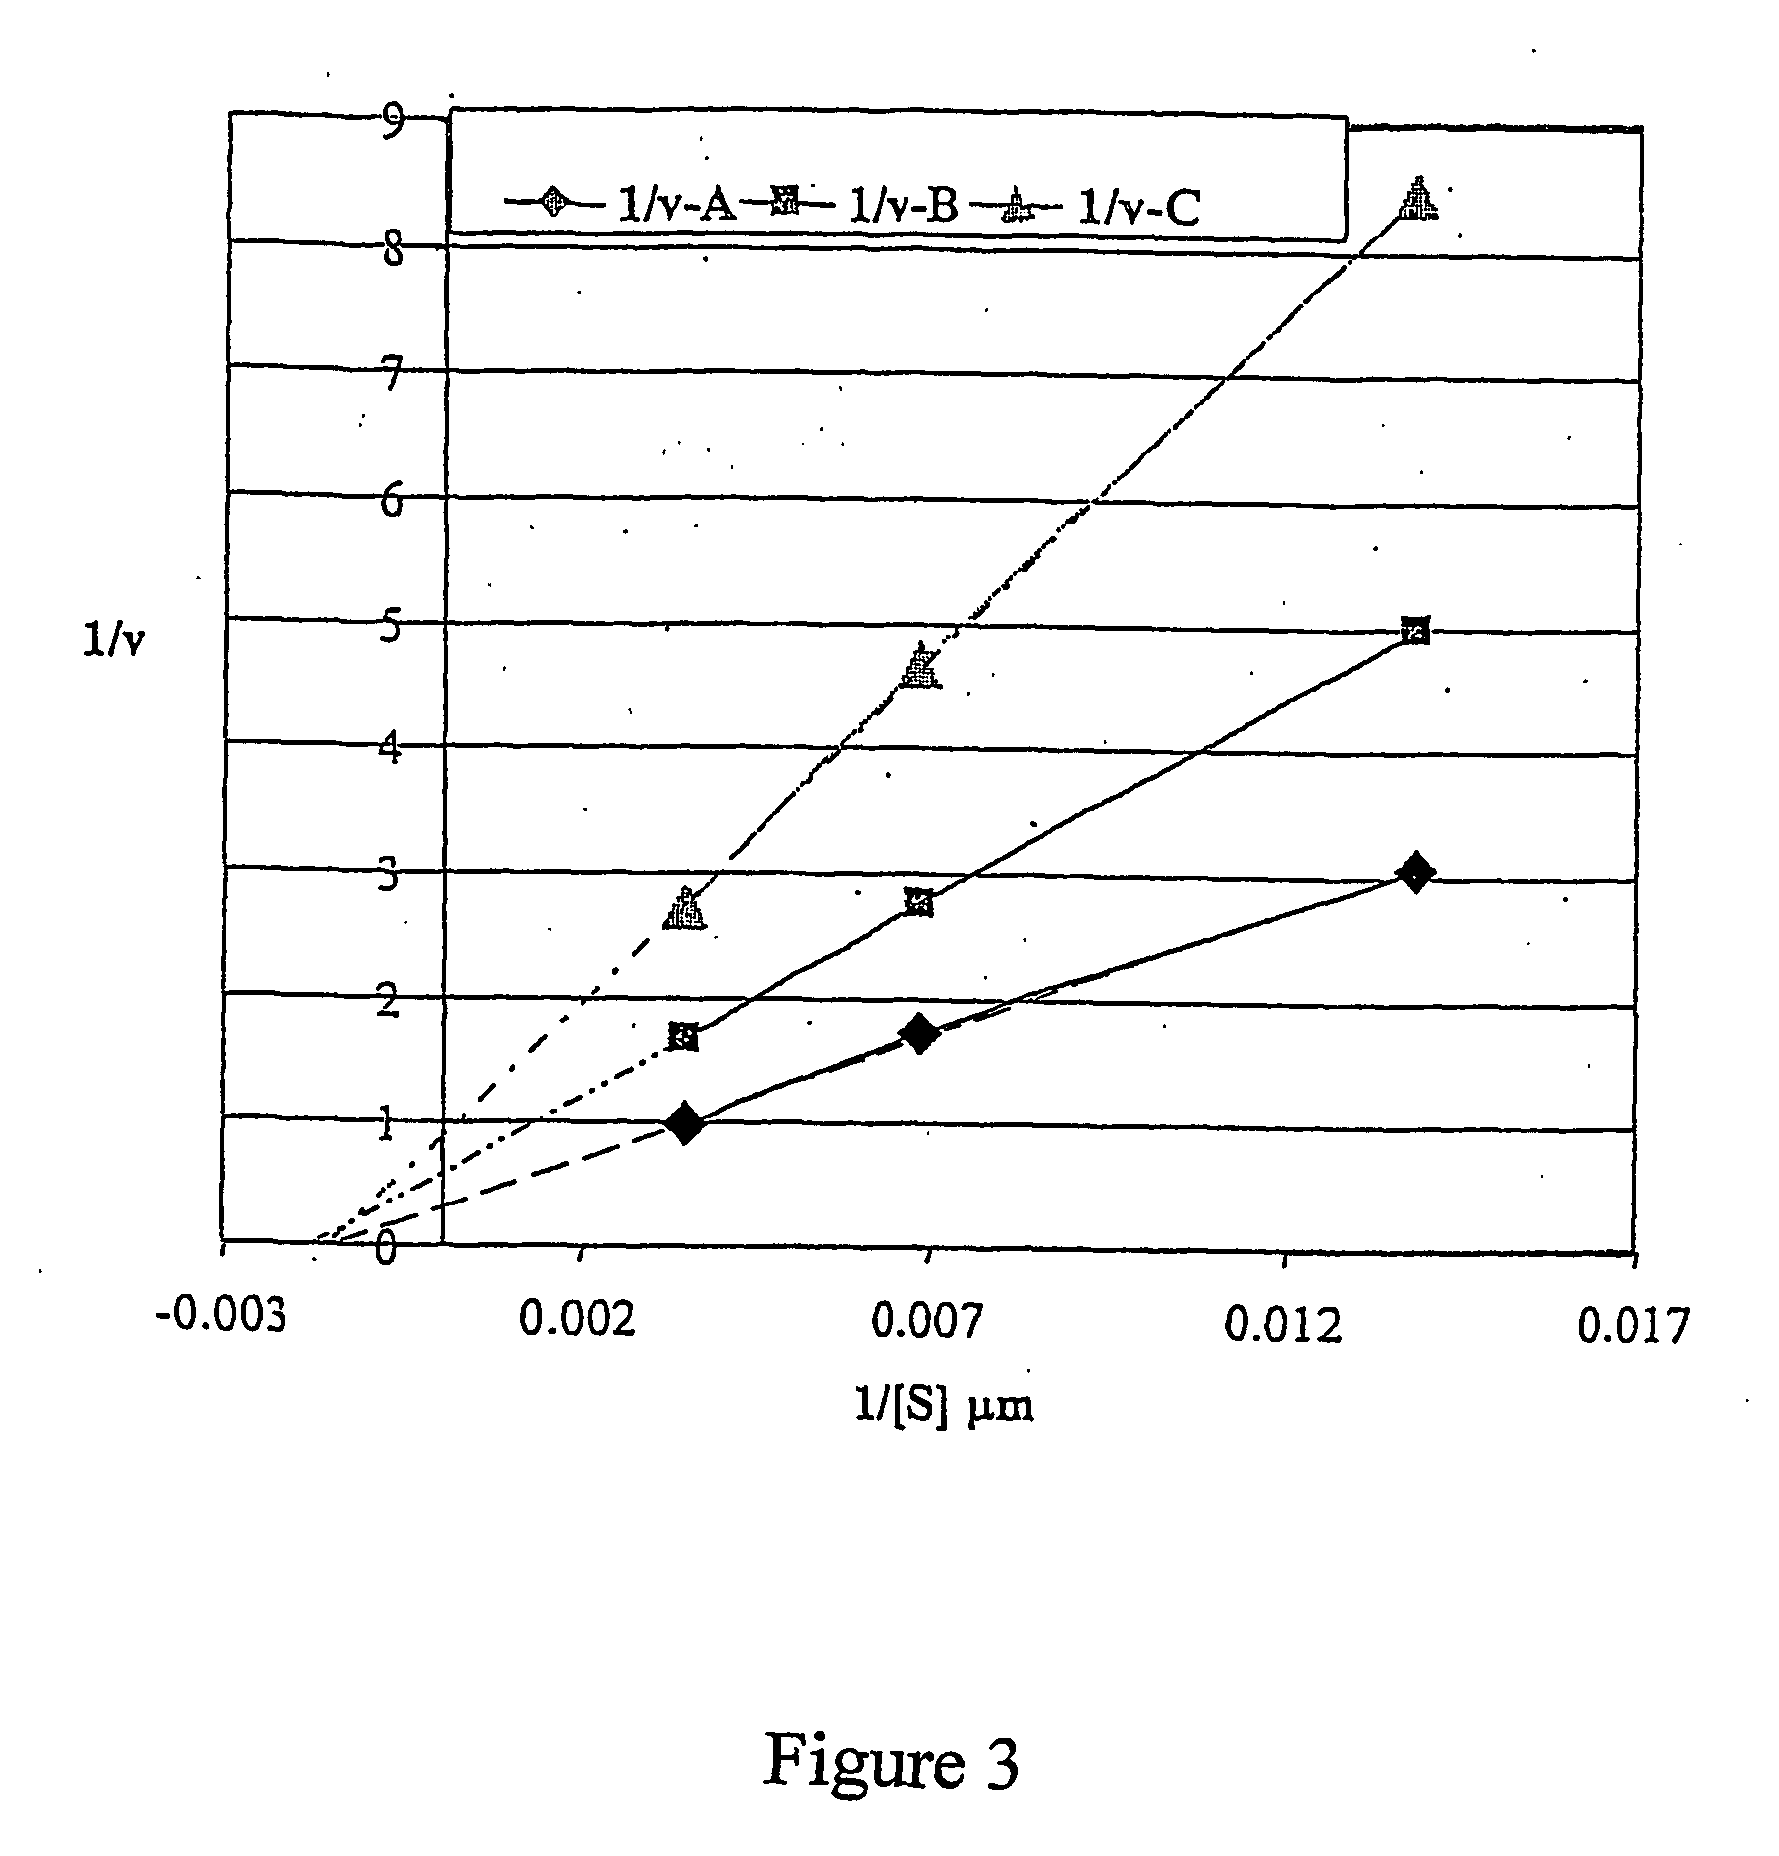 Fluorescent substrates for detecting organophosphatase enzyme activity